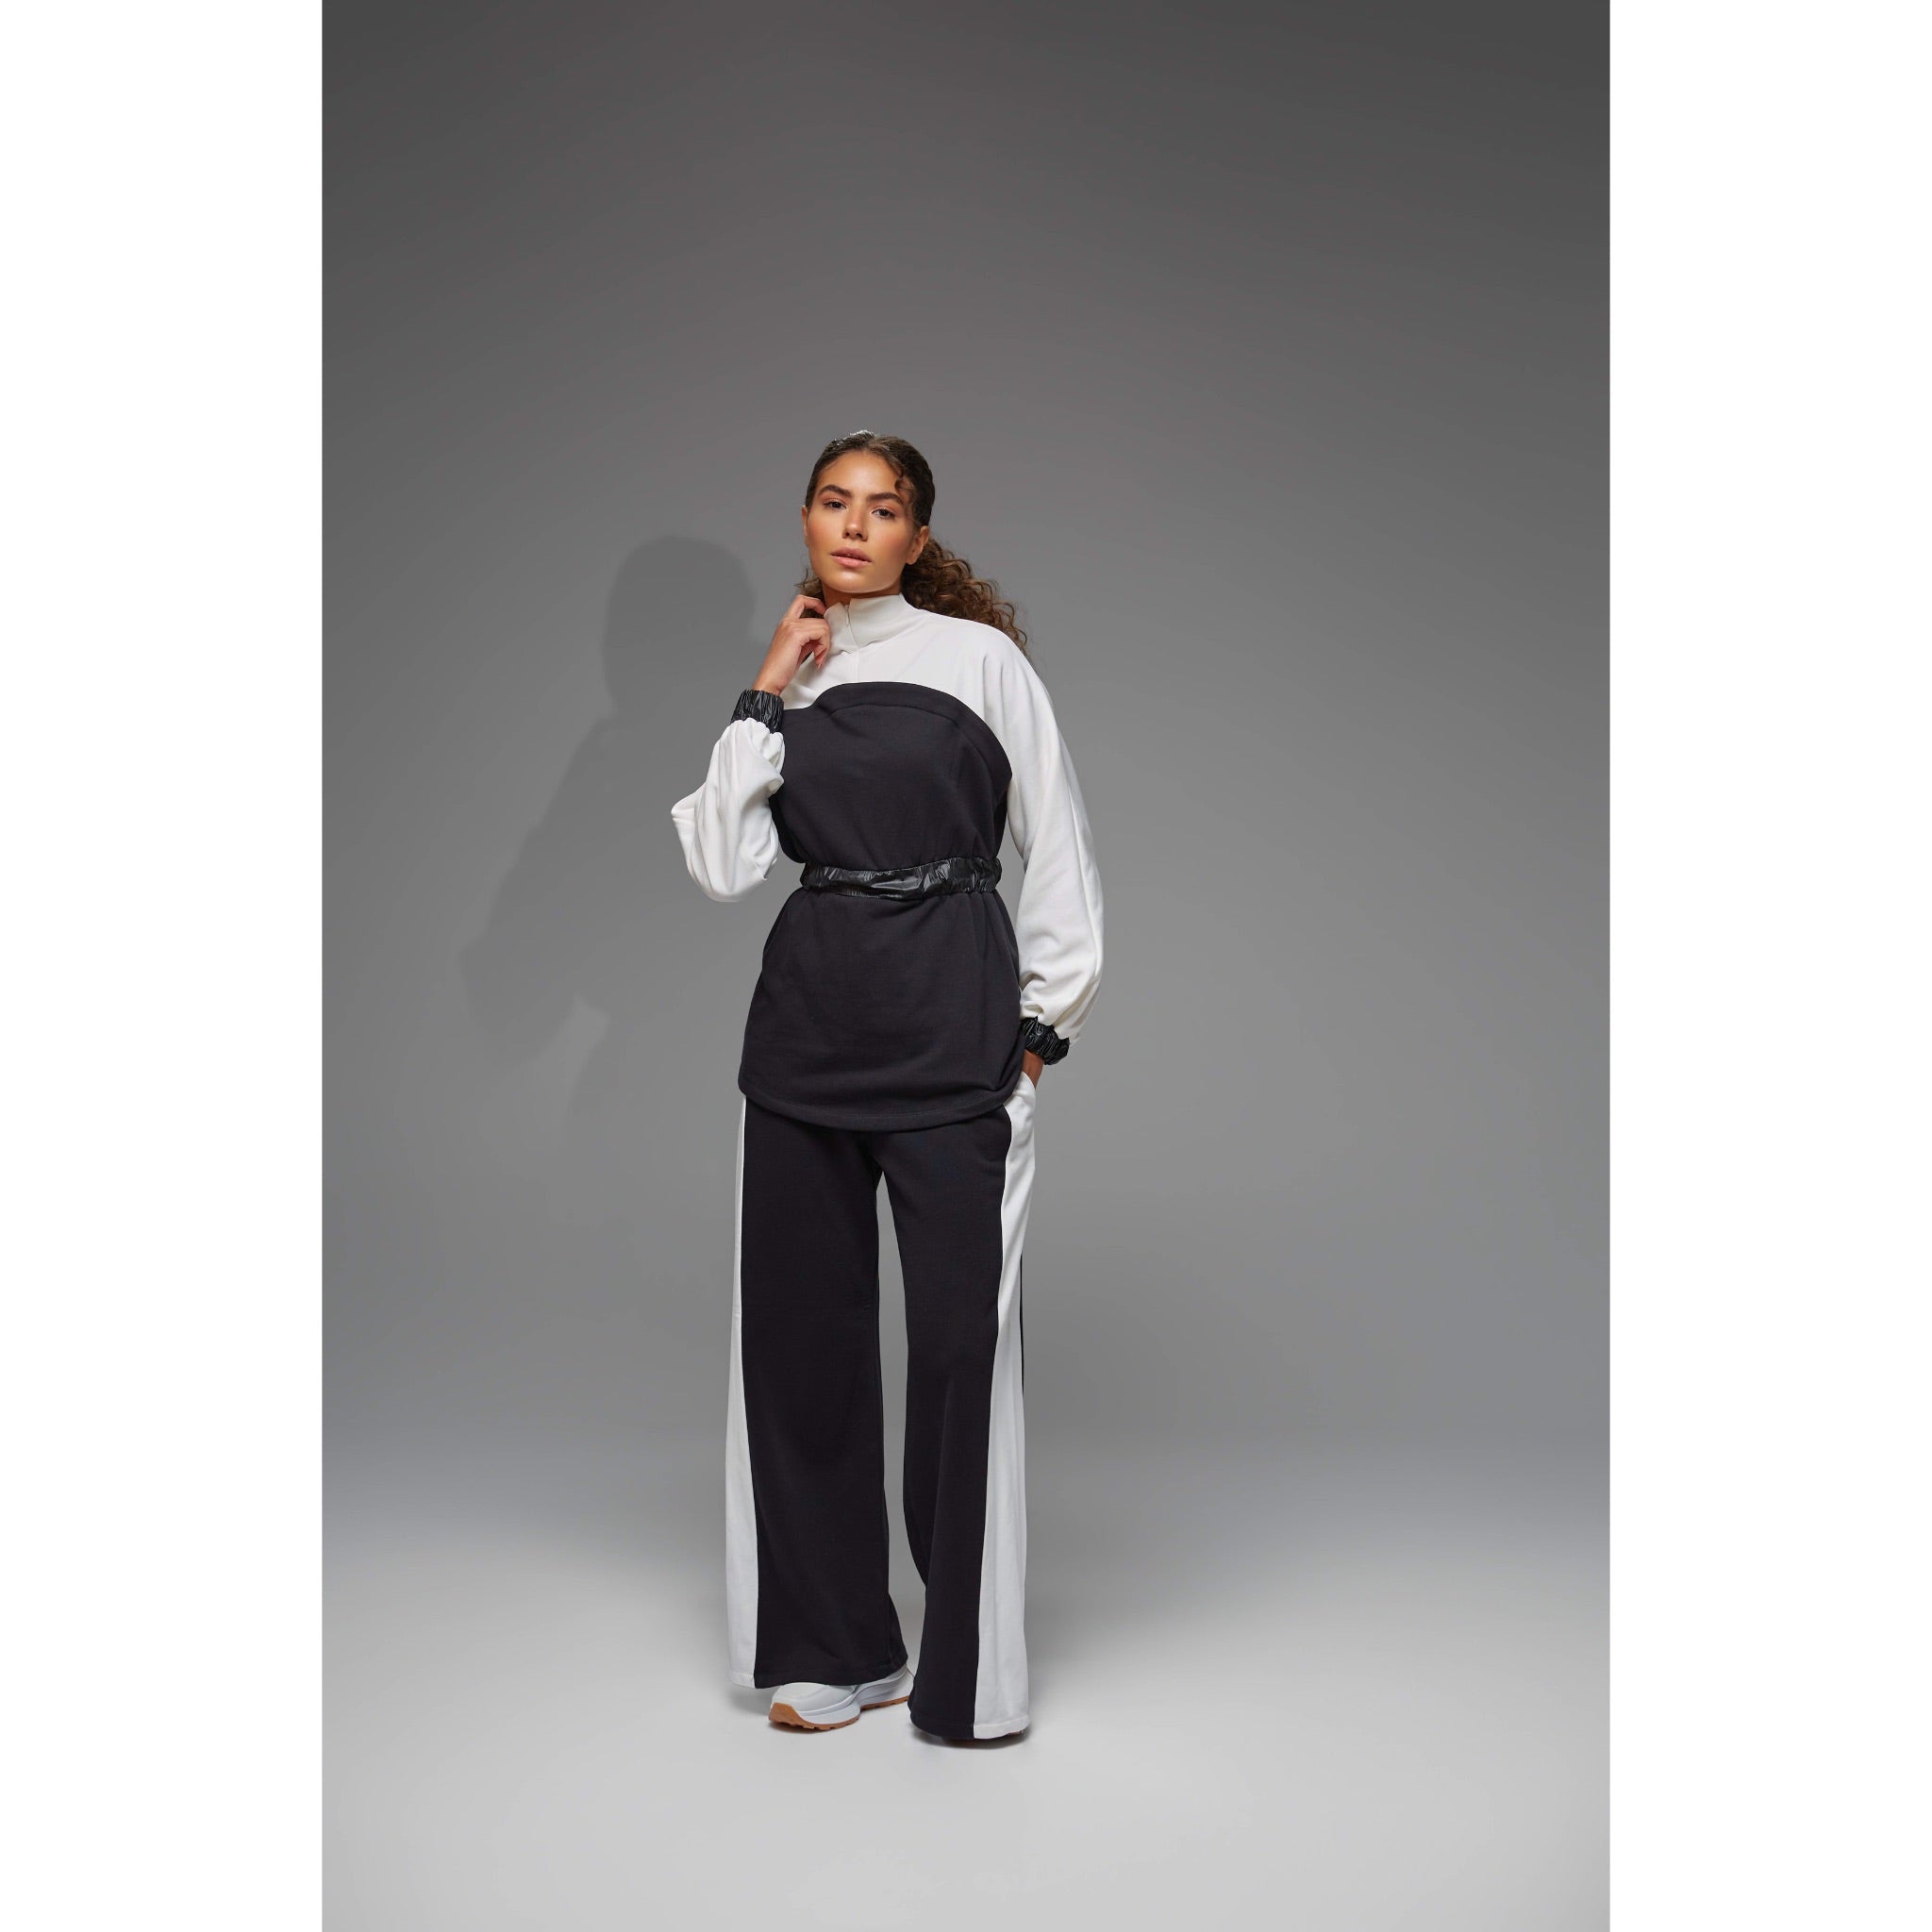 Dual Colored Tracksuit in Black & White